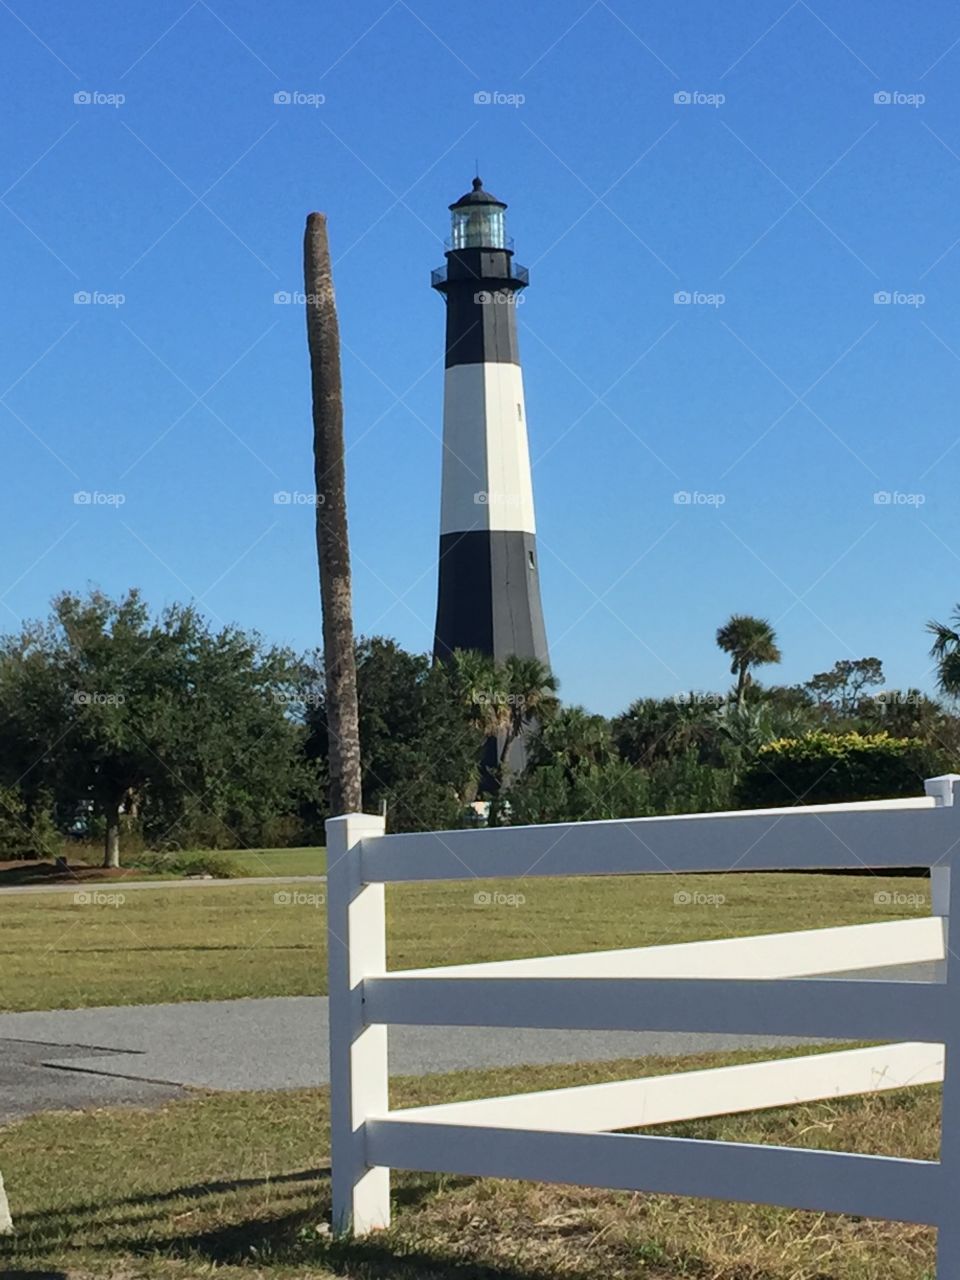 Lighthouse is the same size as the tree 